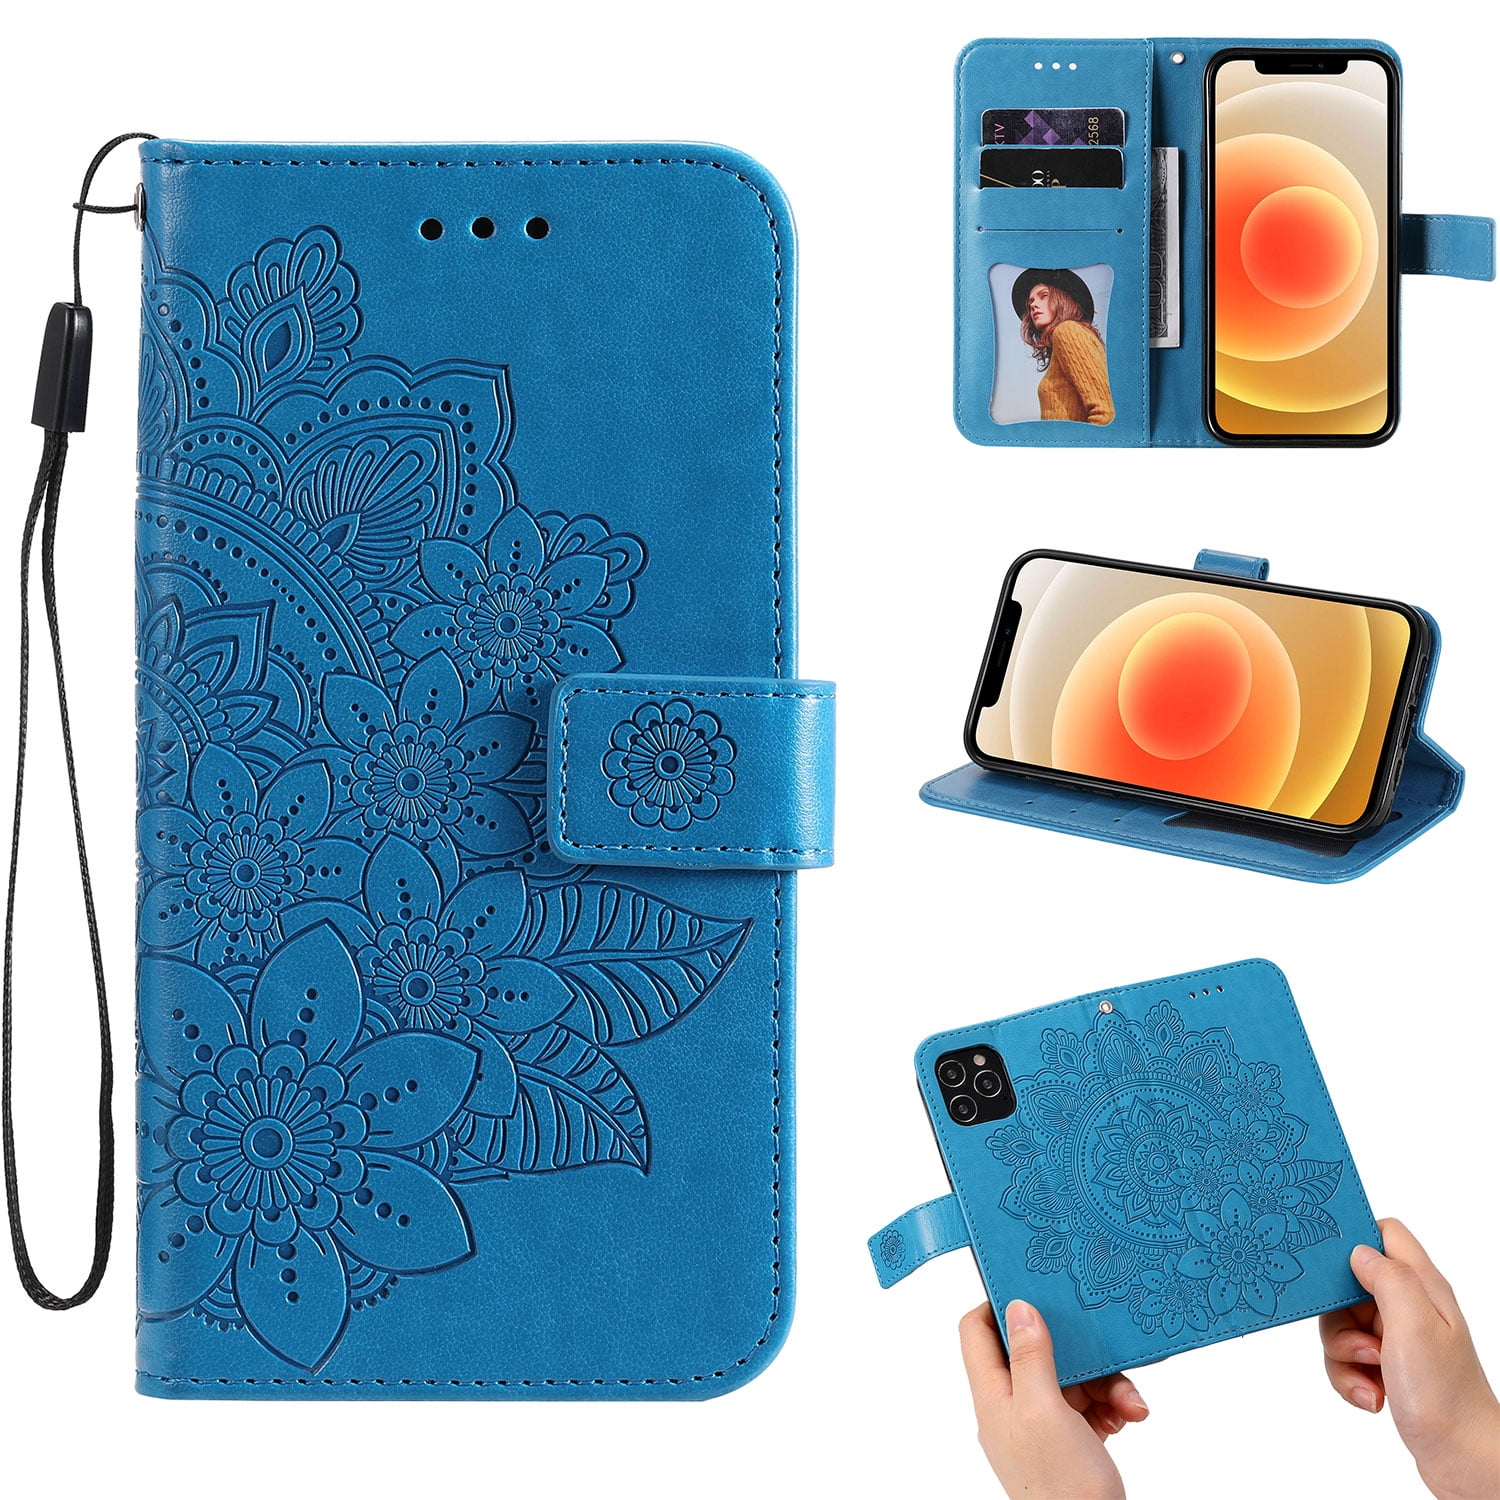 Allytech Case for iPhone 12 6.1 inch, Luxury Leather Women Wallet